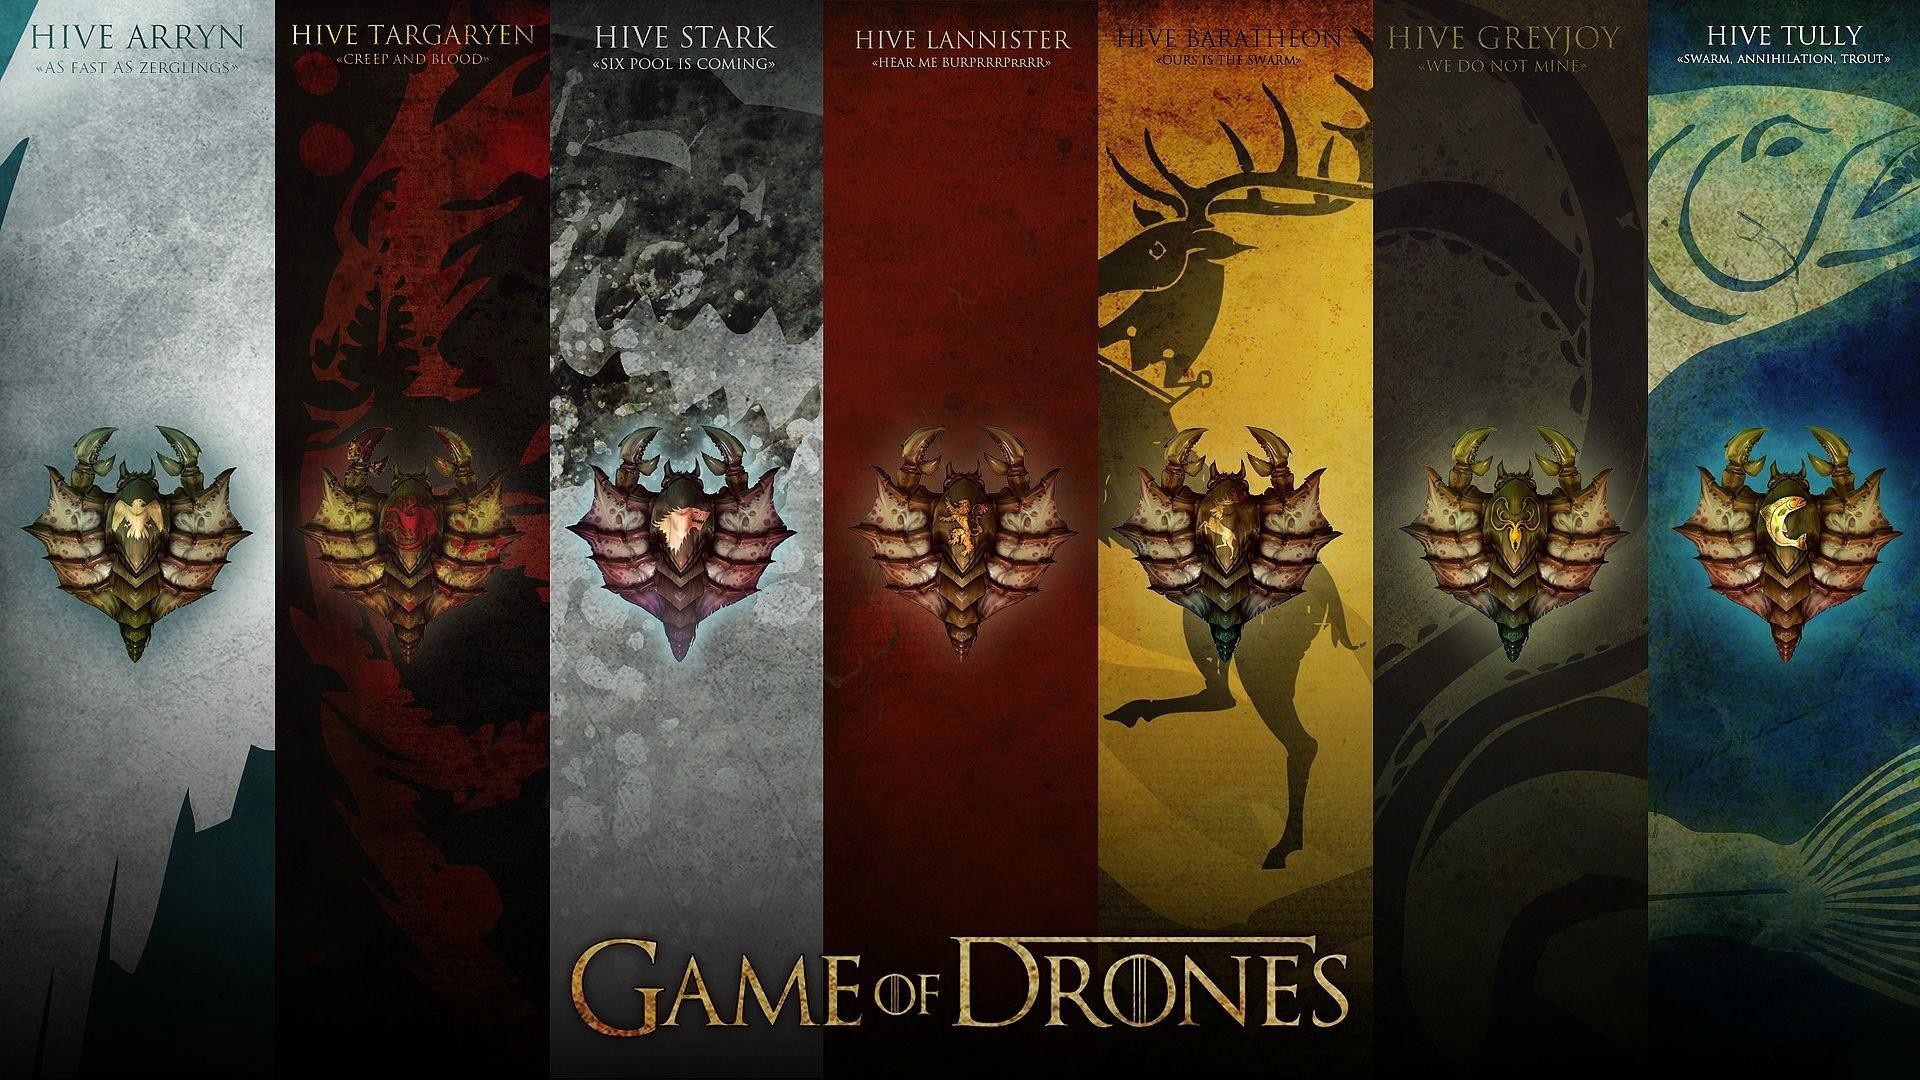 1920x1080 More wallpaper collections. 63 Wallpapers. game of thrones wallpaper android